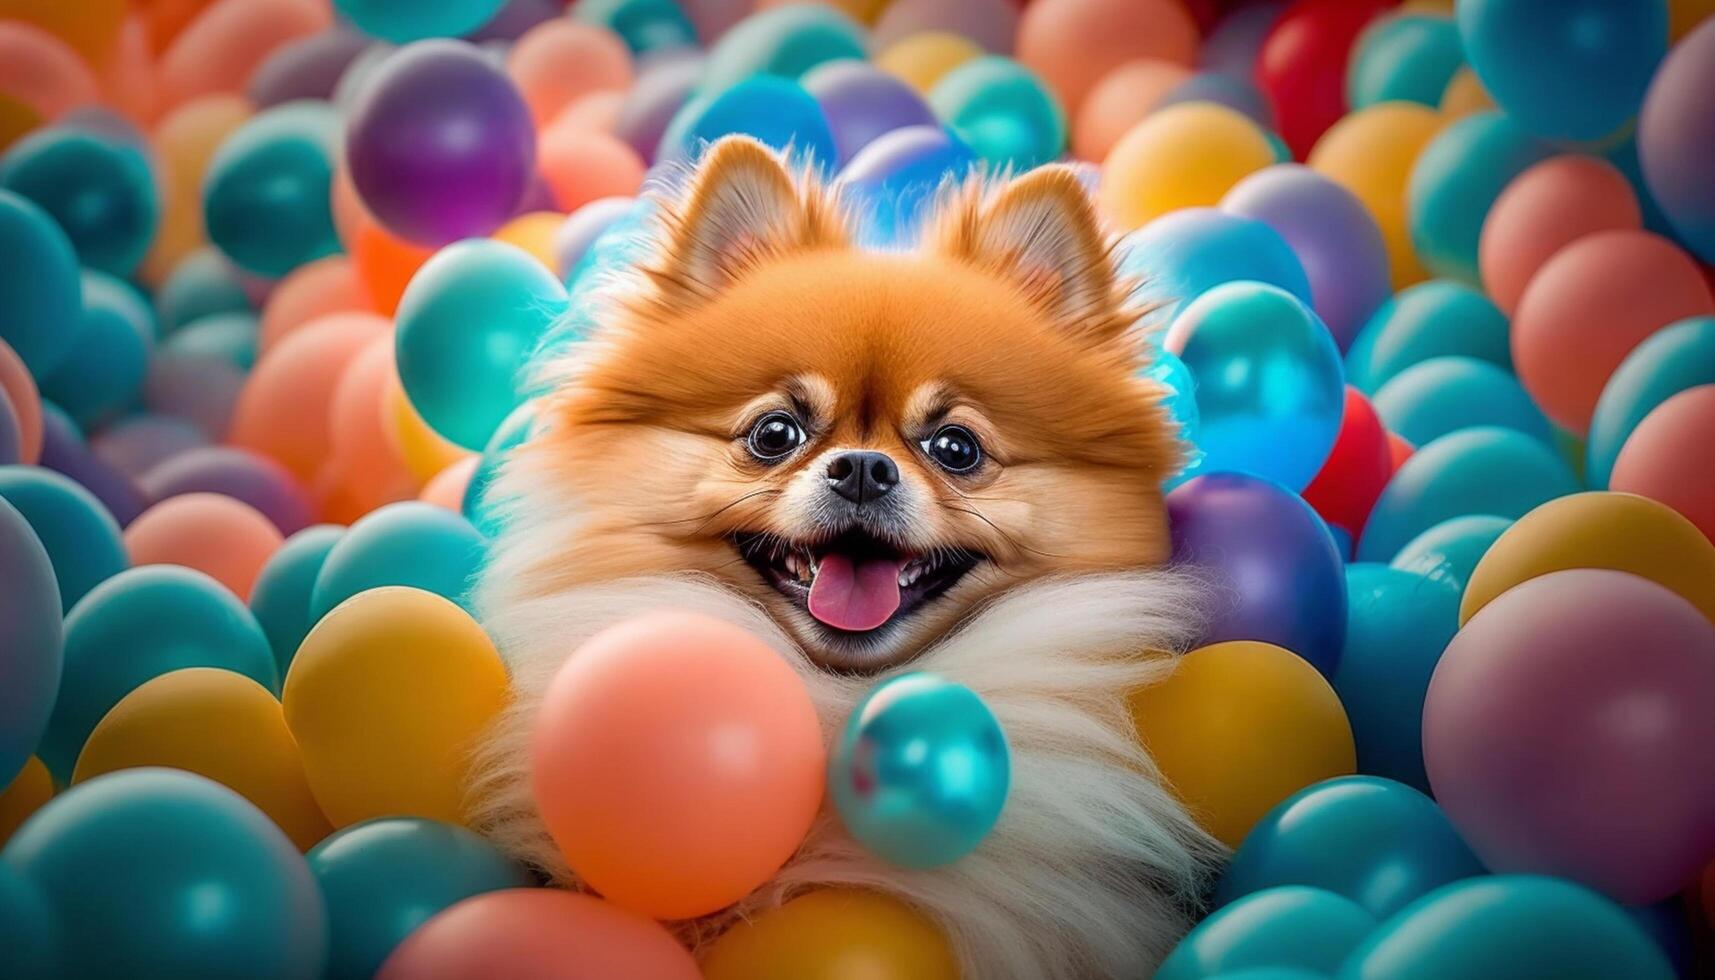 Fluffy Pomeranian in a Colorful Ball Pit with Hundreds of Balloons photo